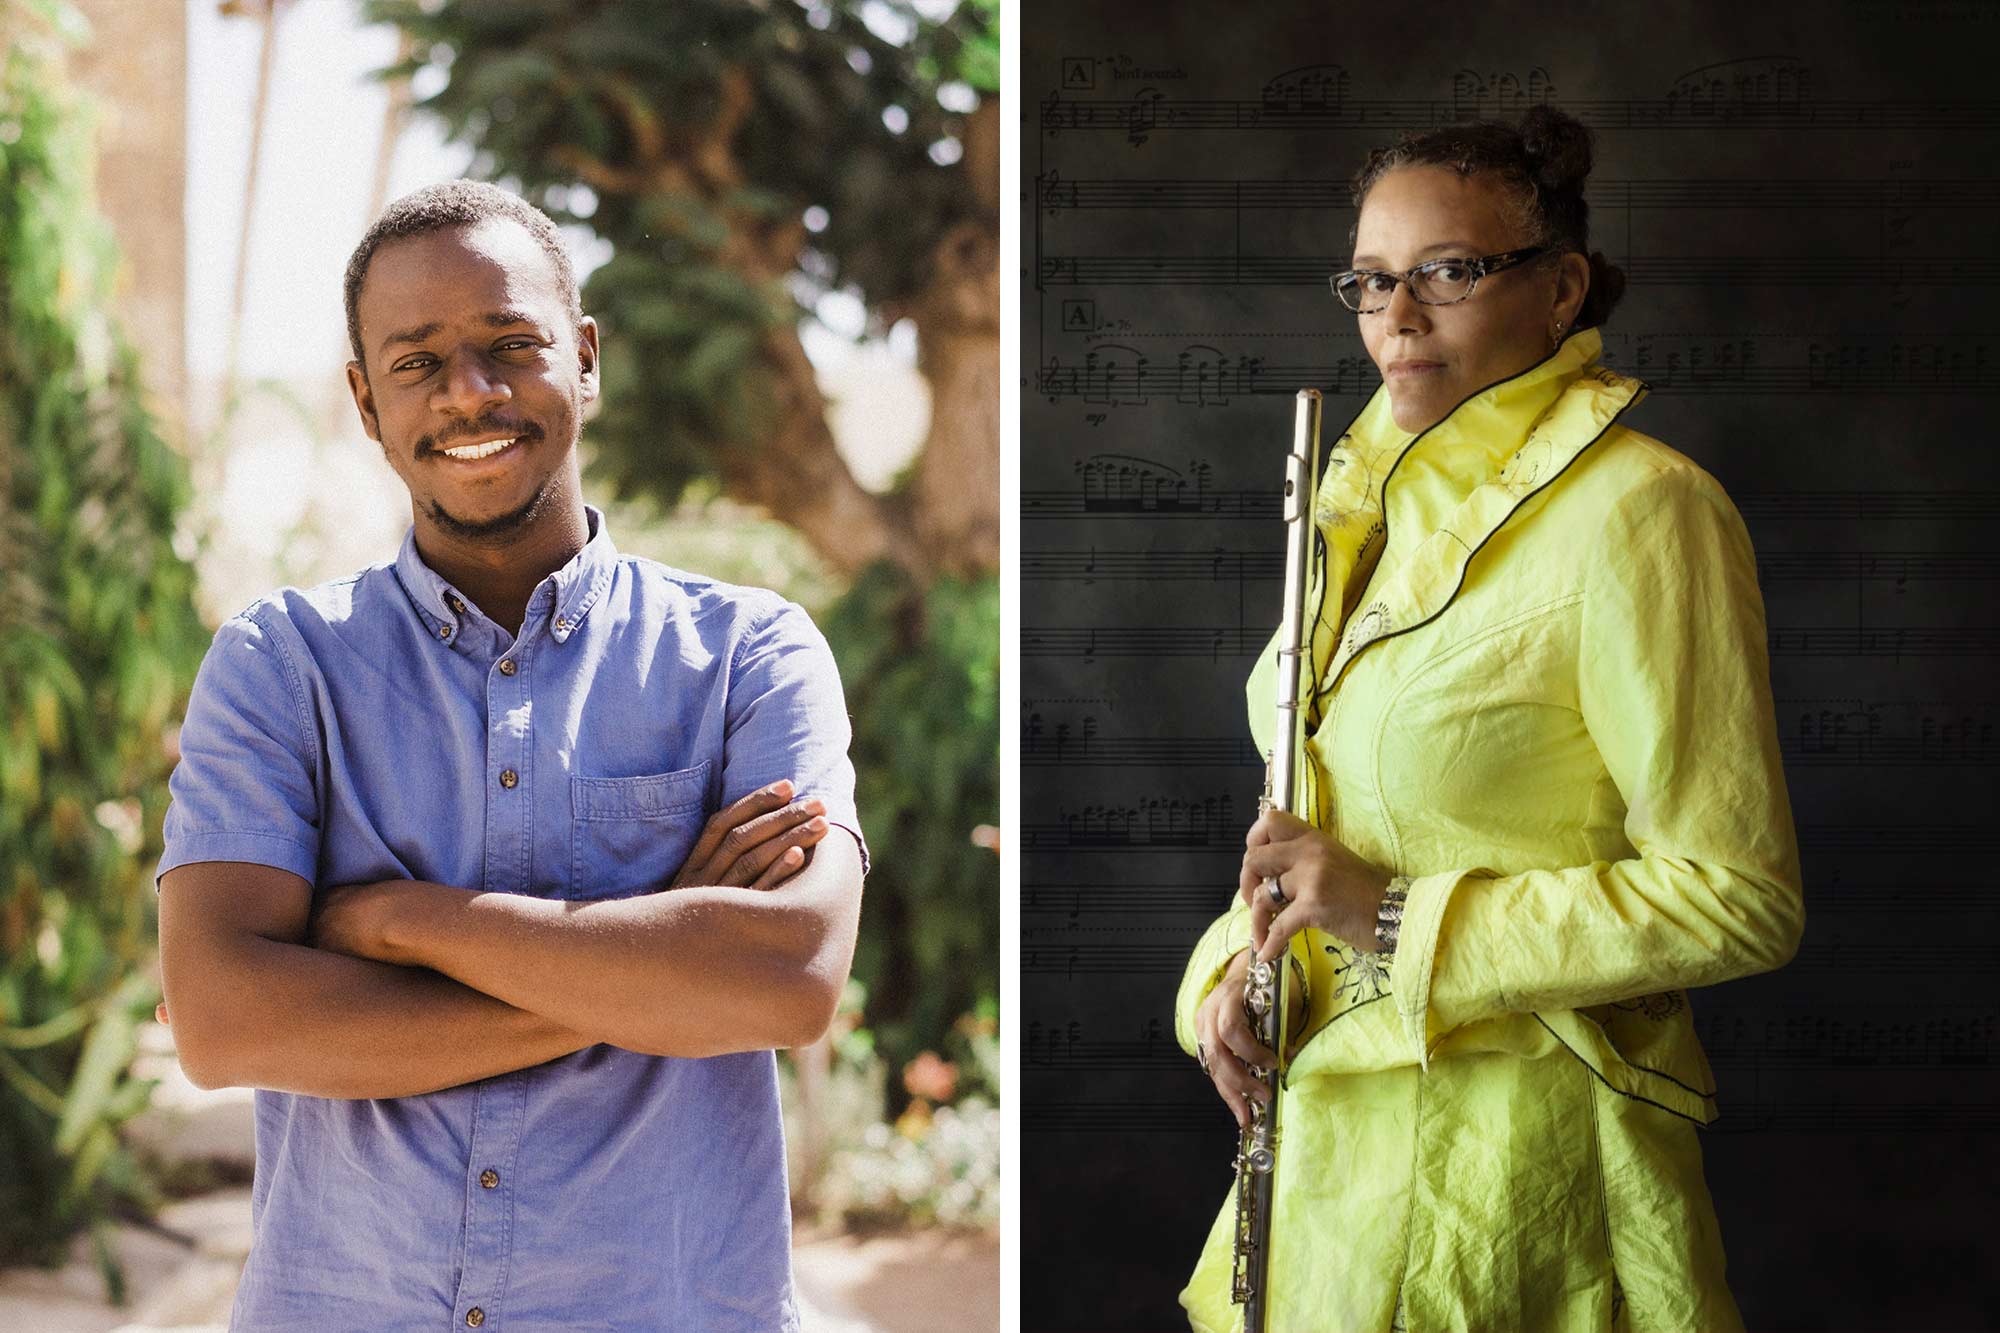 Portraits of Mamadou Dia, left, and Nicole Mitchell, right